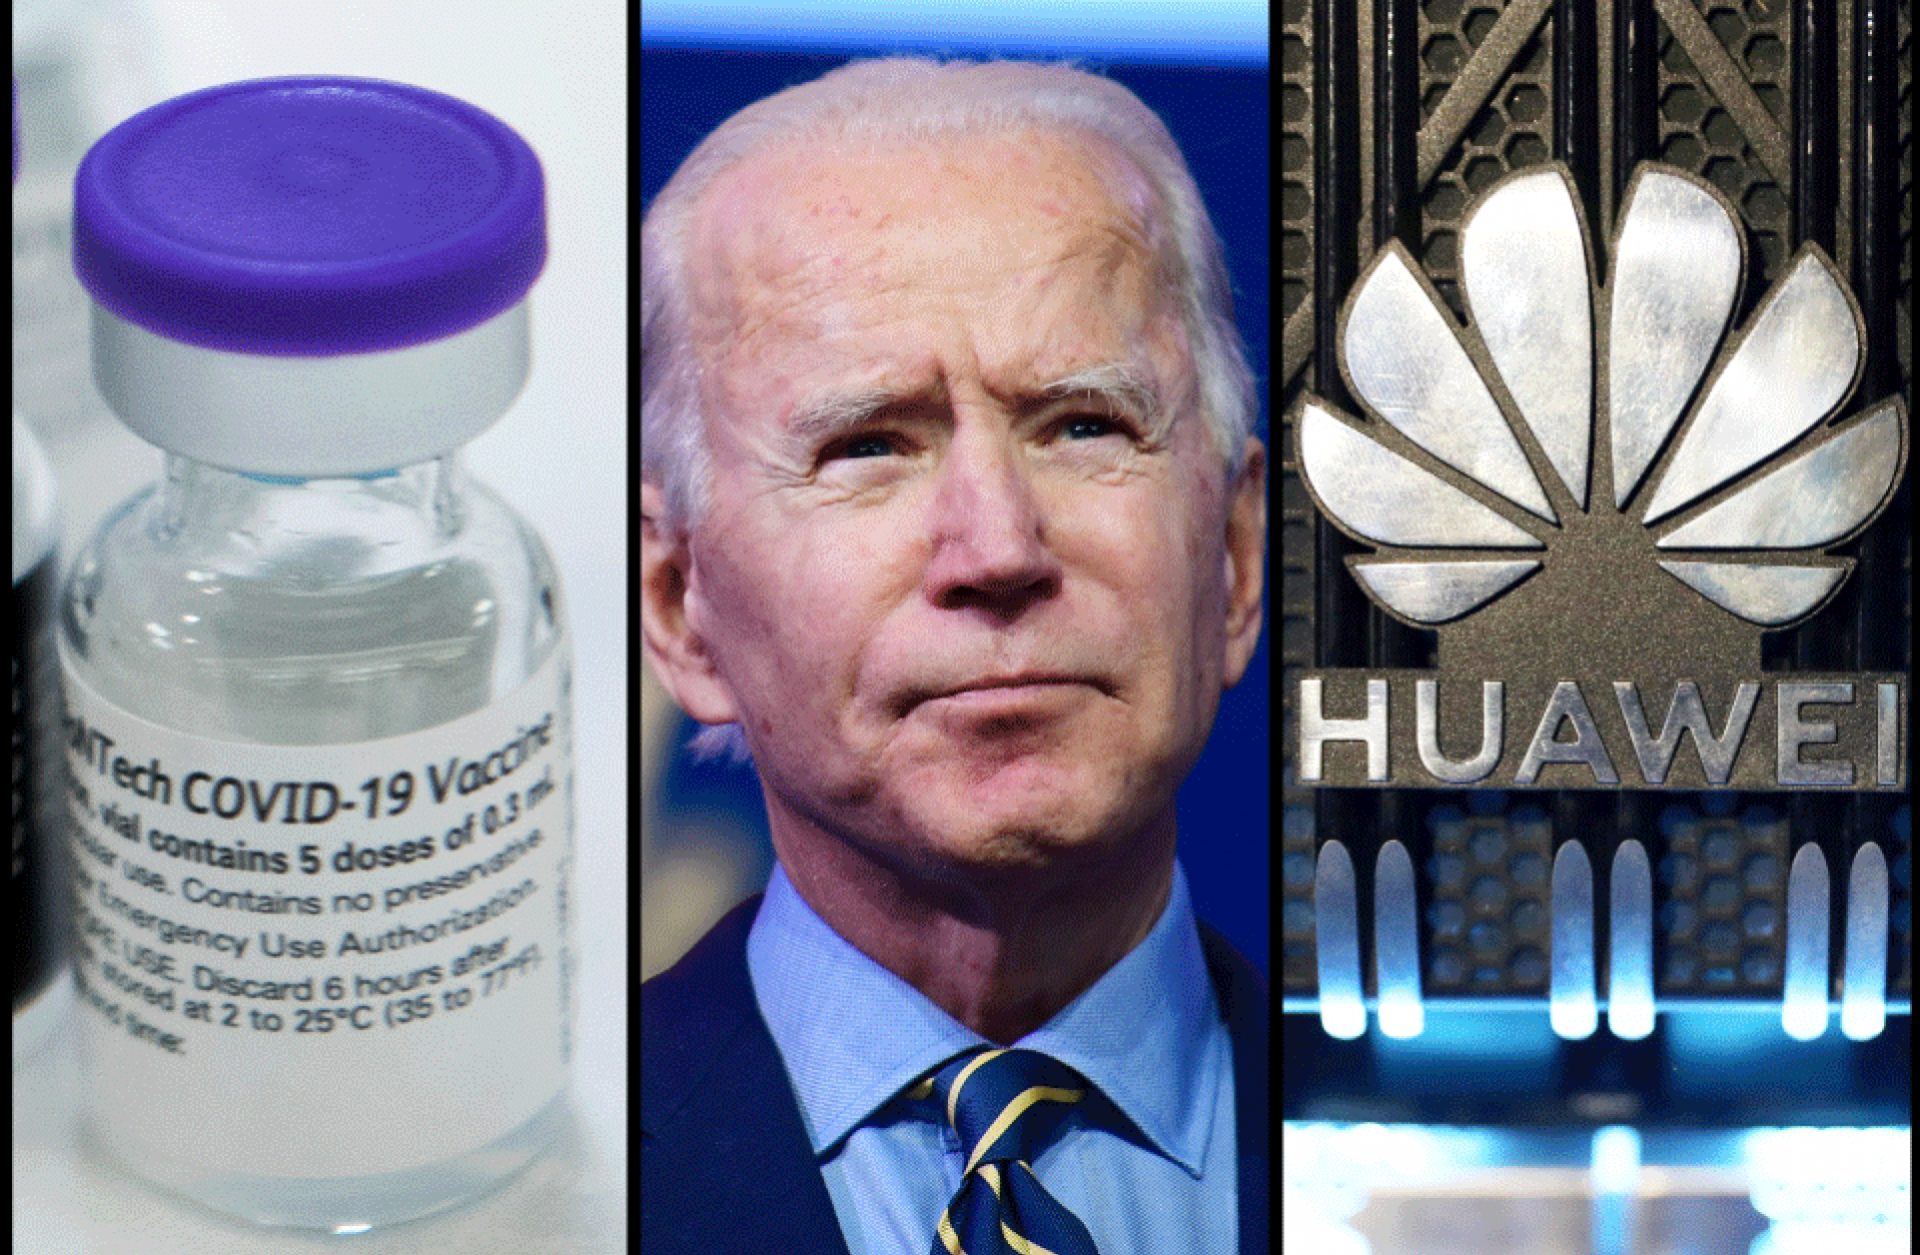 A compilation of four photos (from left to right) shows a COVID-19 vaccine, U.S. President Joe Biden, the logo of the Chinese telecommunications company Huawei, and a stock market sign. 